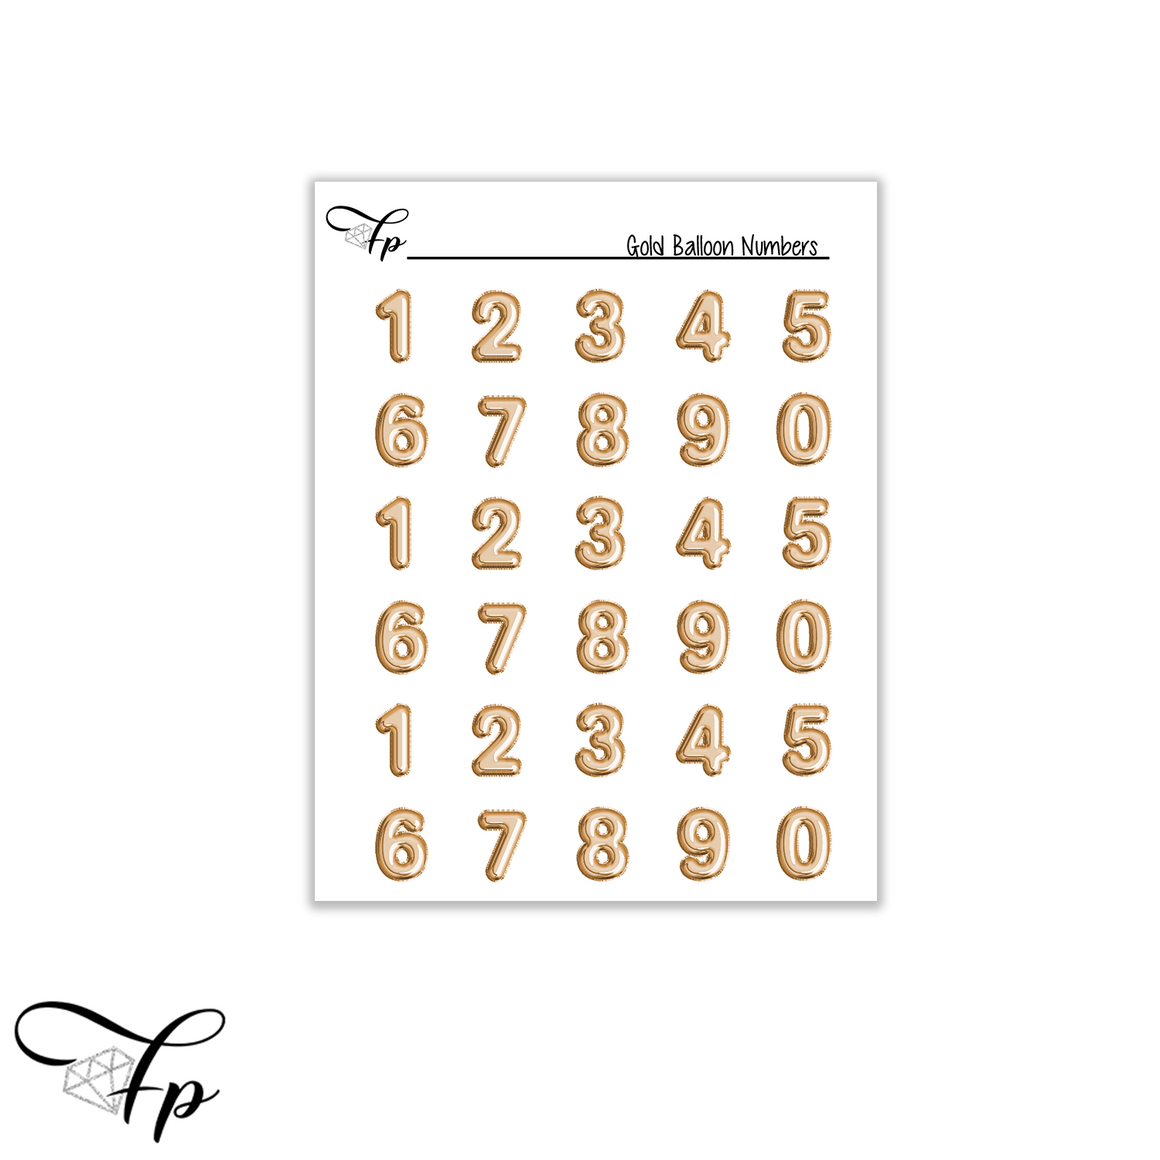 Gold Balloon Numbers